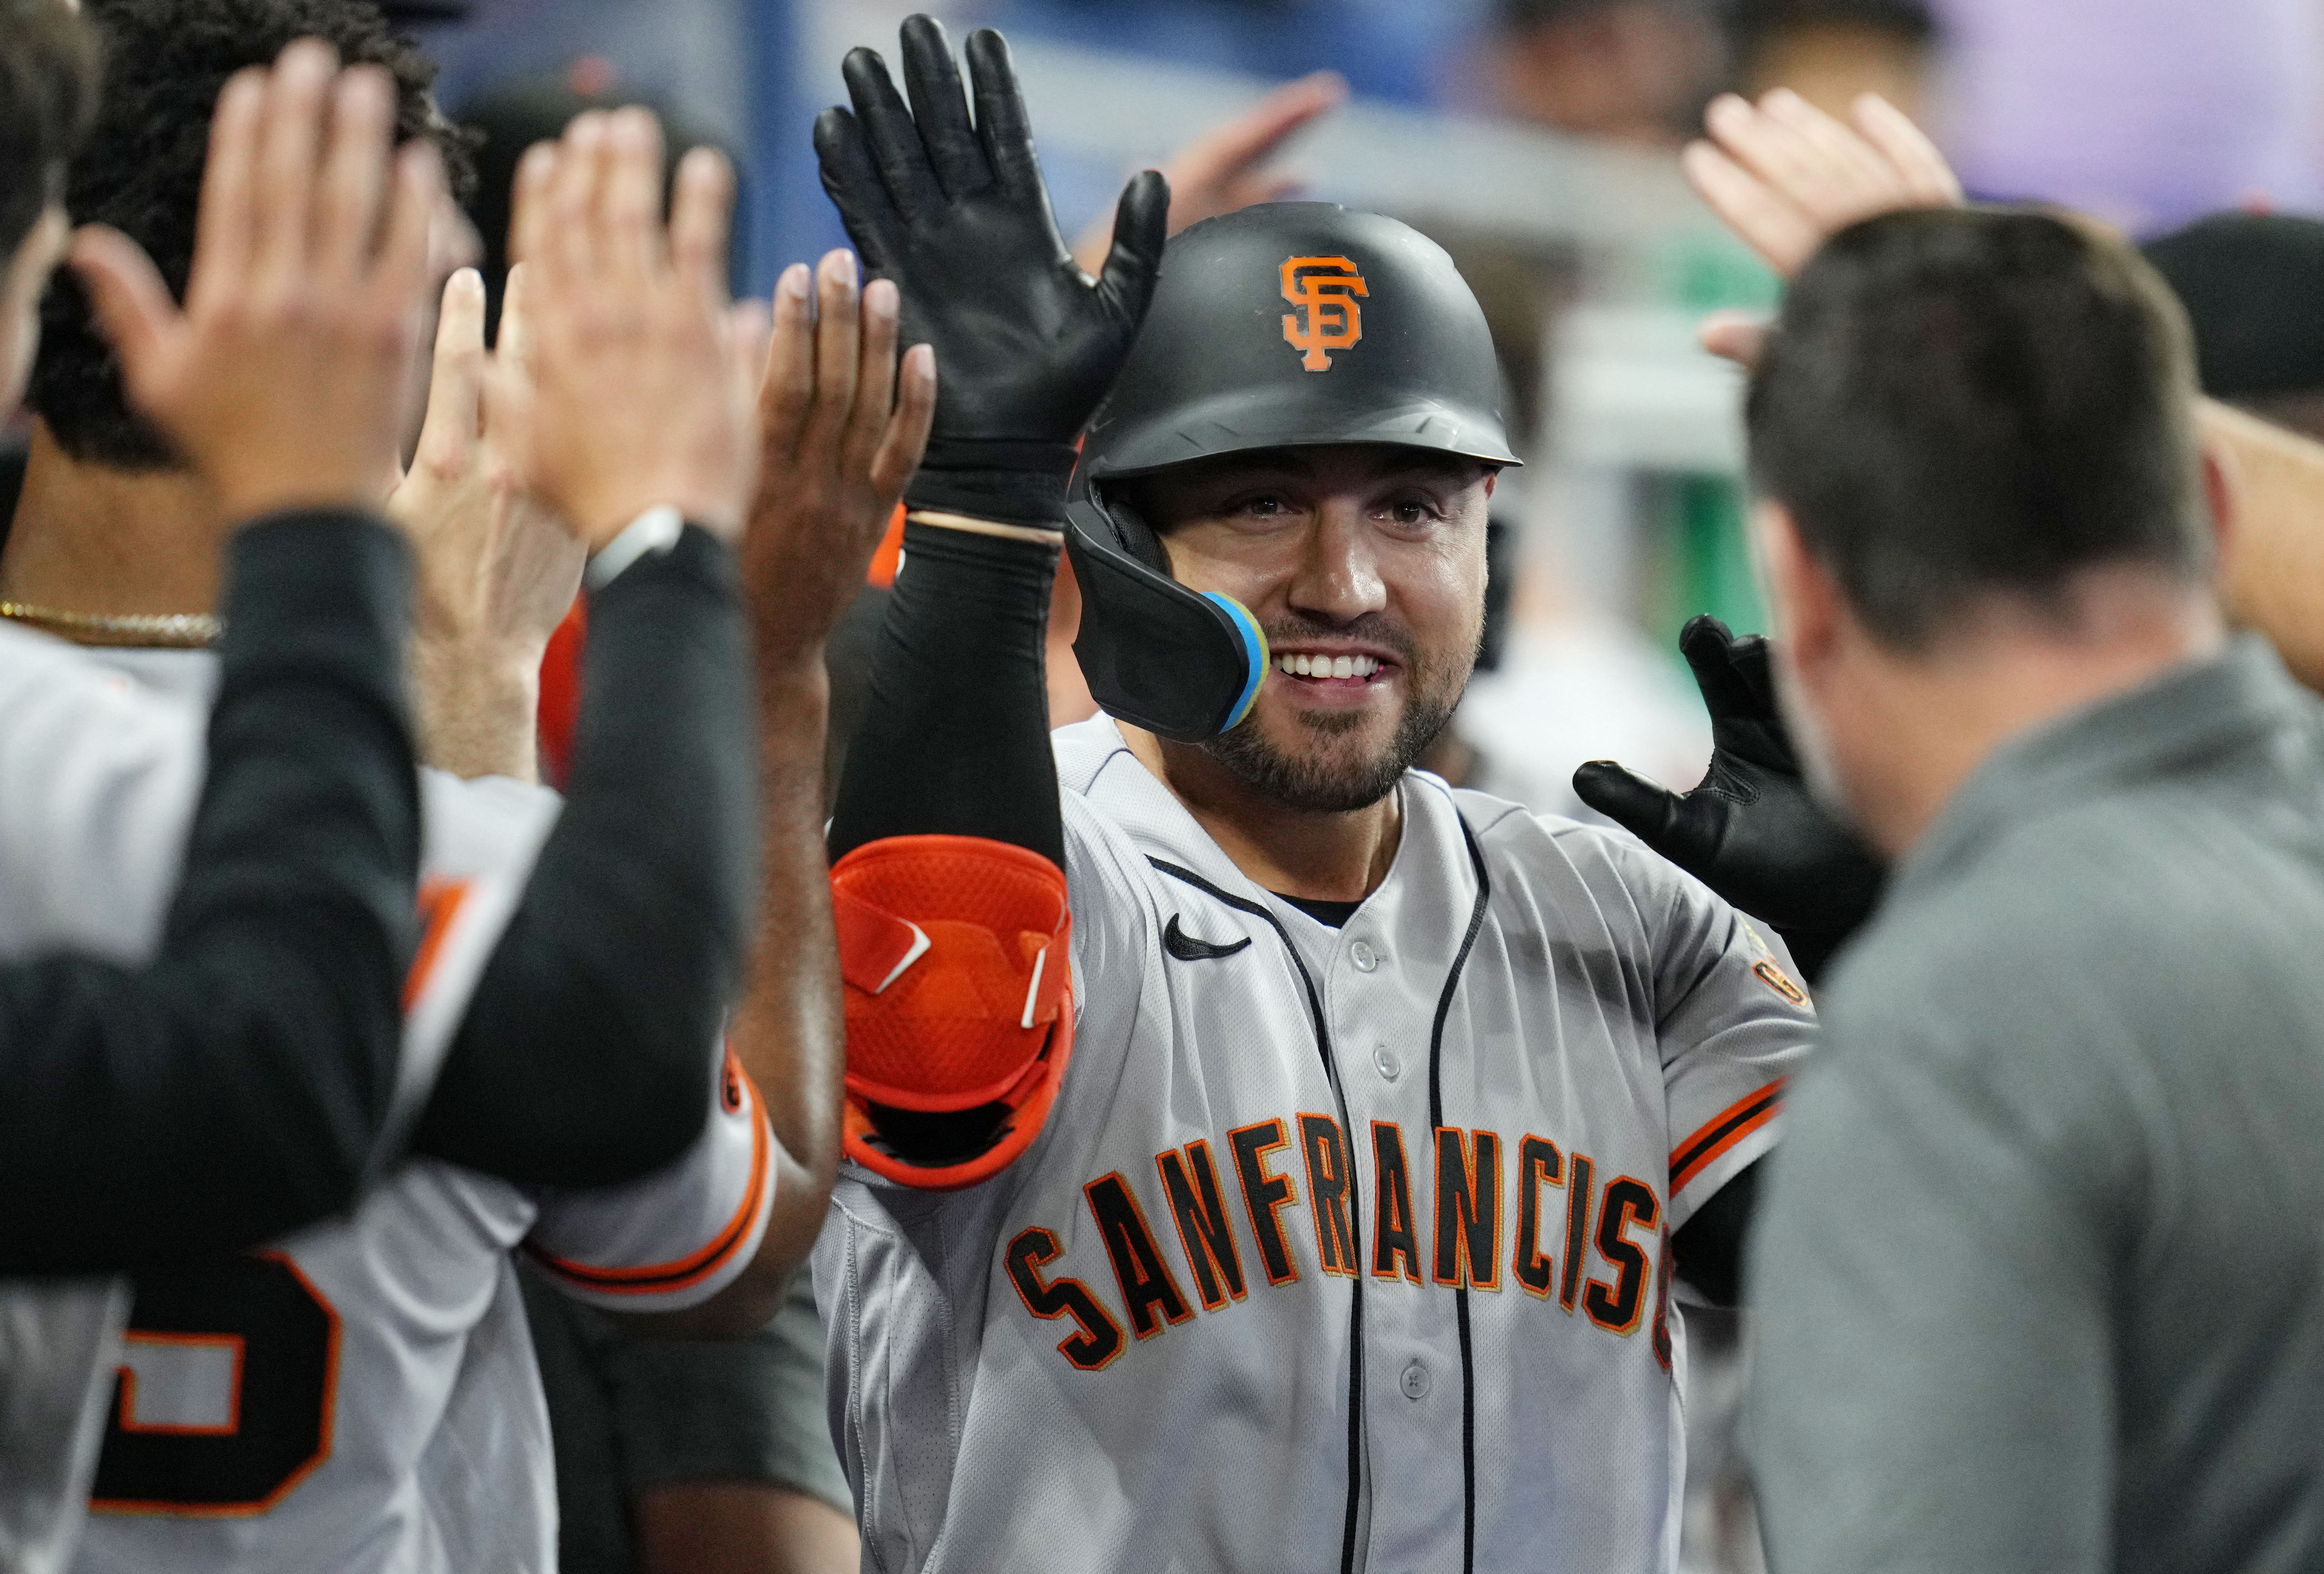 Giants explode for four runs in 11th to slay Marlins